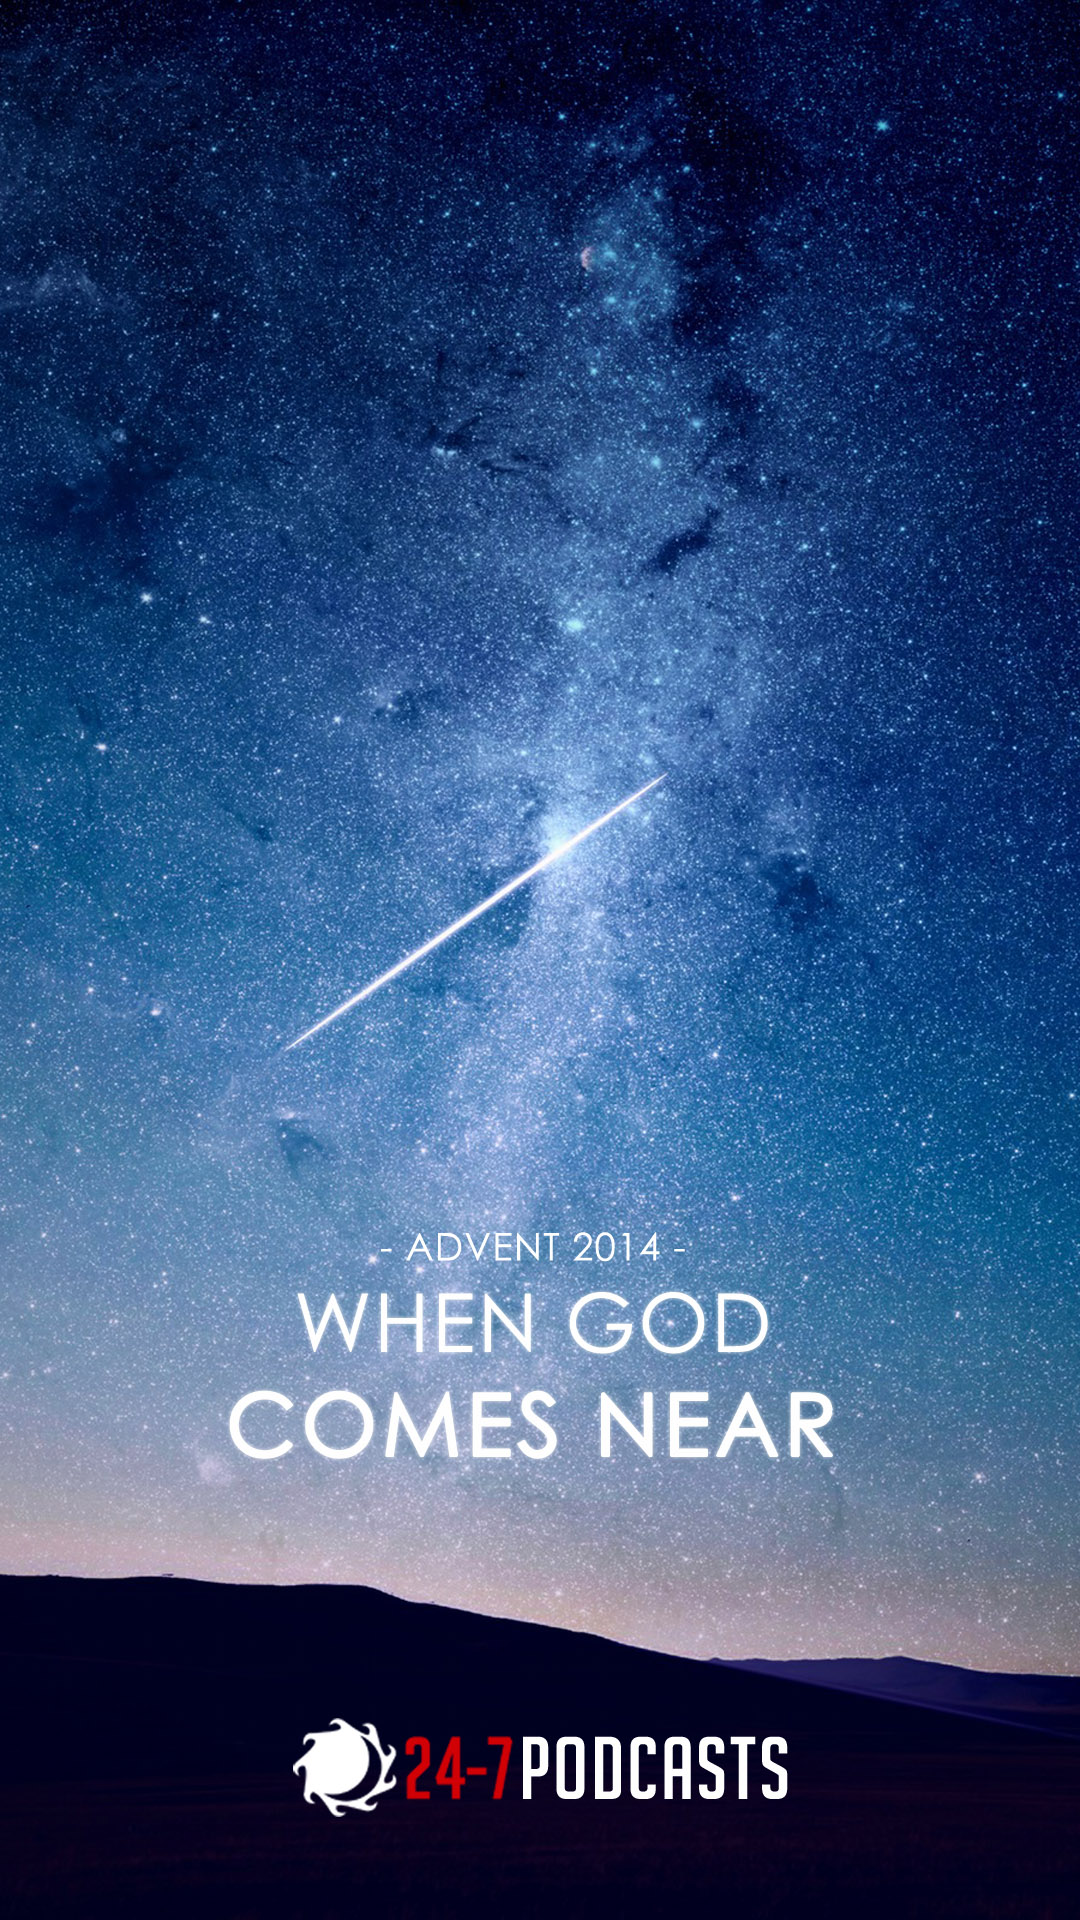 Christian Cell Phone Wallpapers - Wallpaper Zone